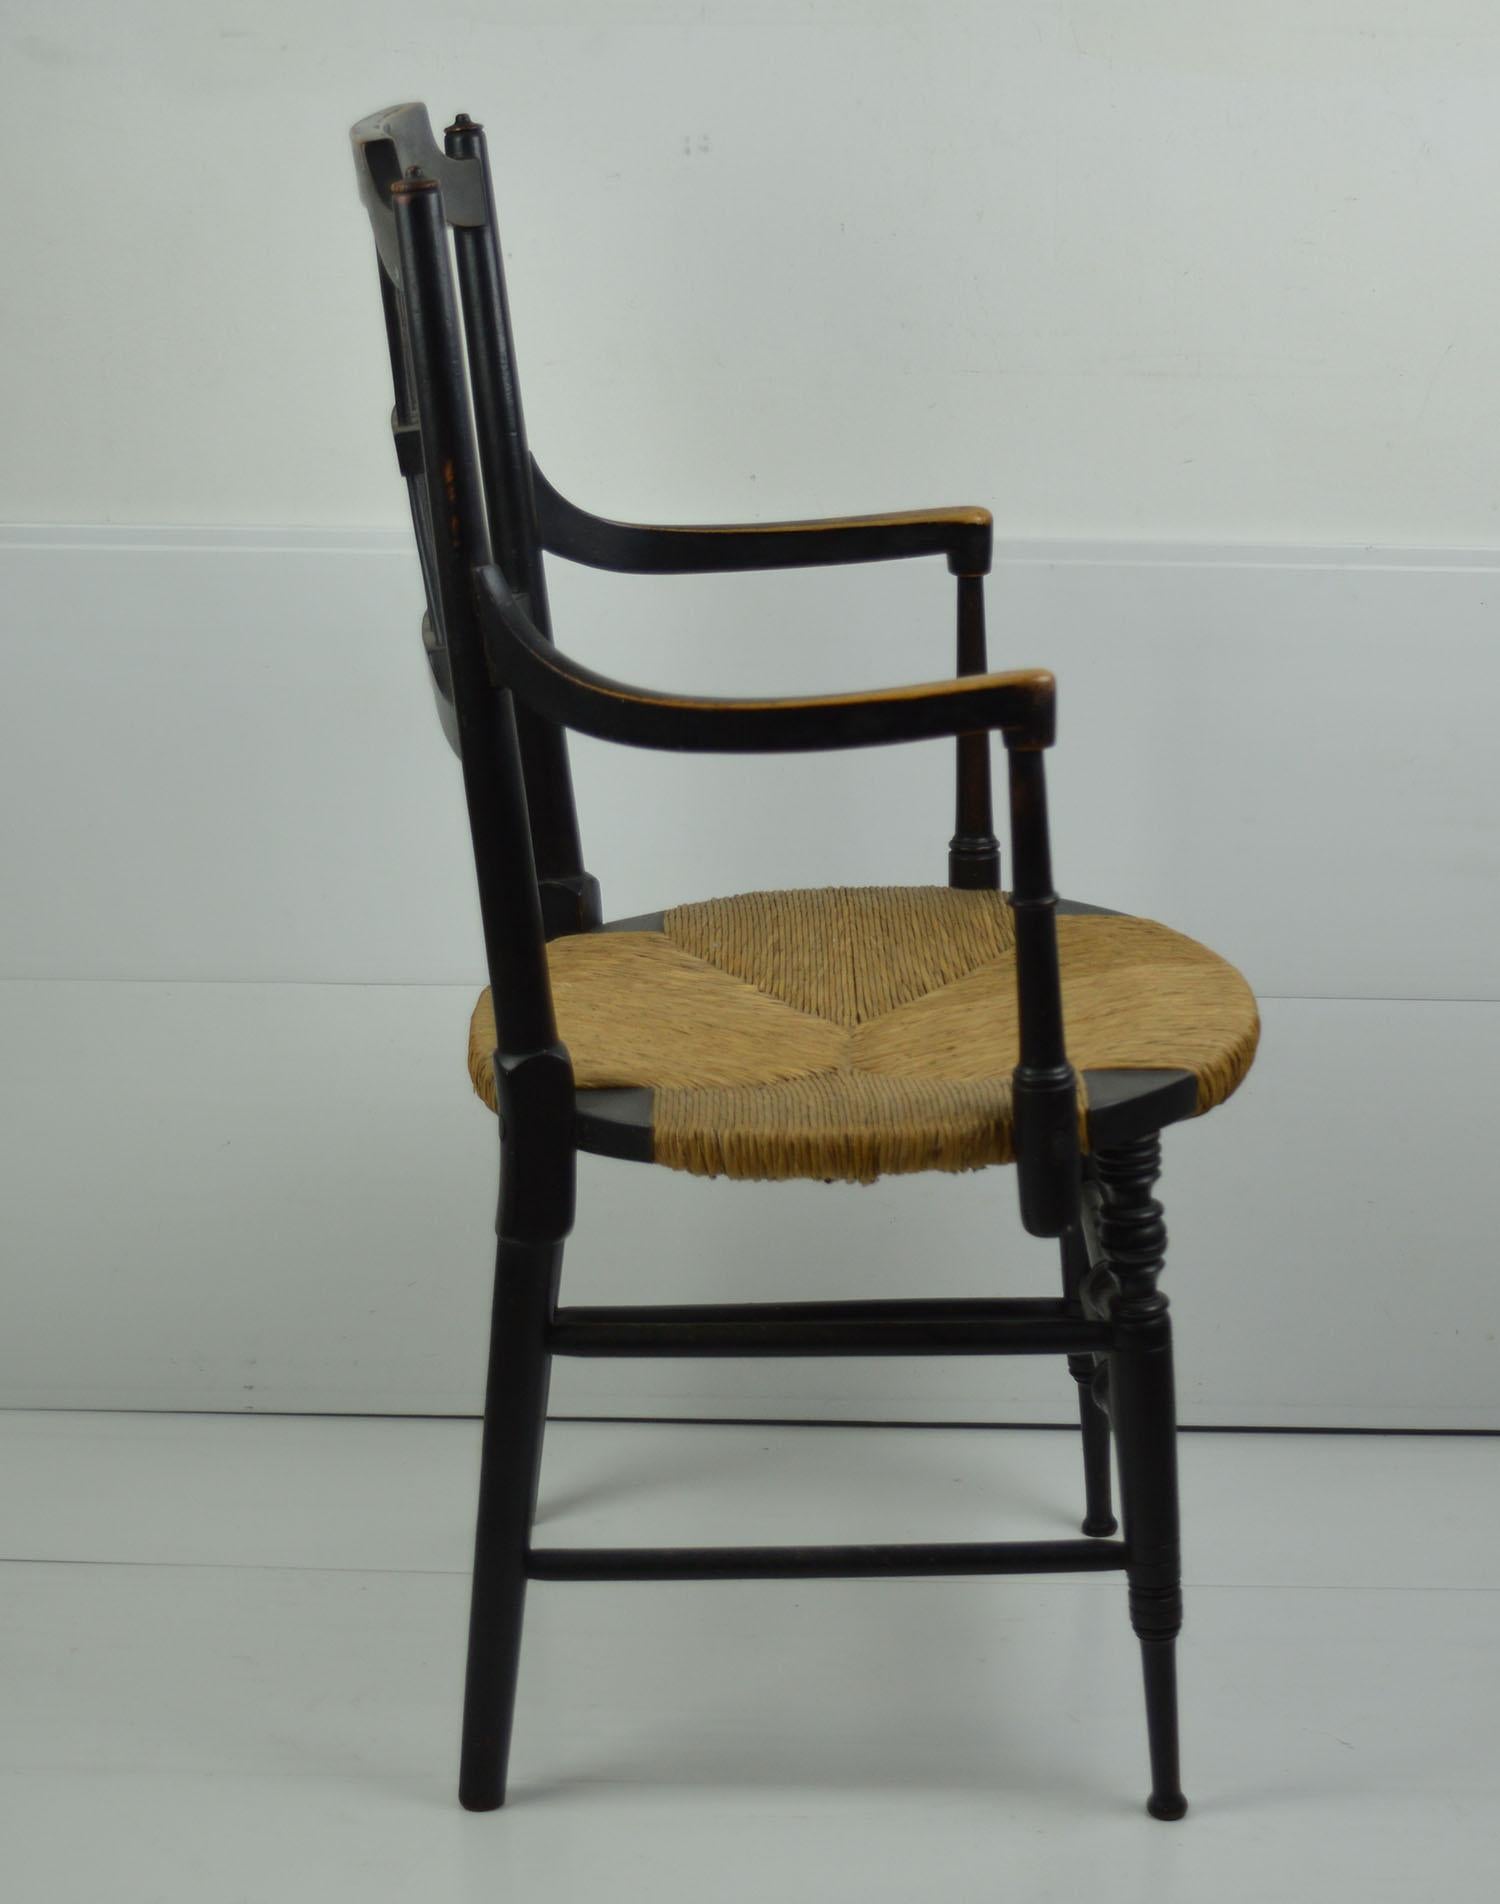 English Antique Ebonised Rush Seated Chair Designed by Dante Gabriel Rossetti